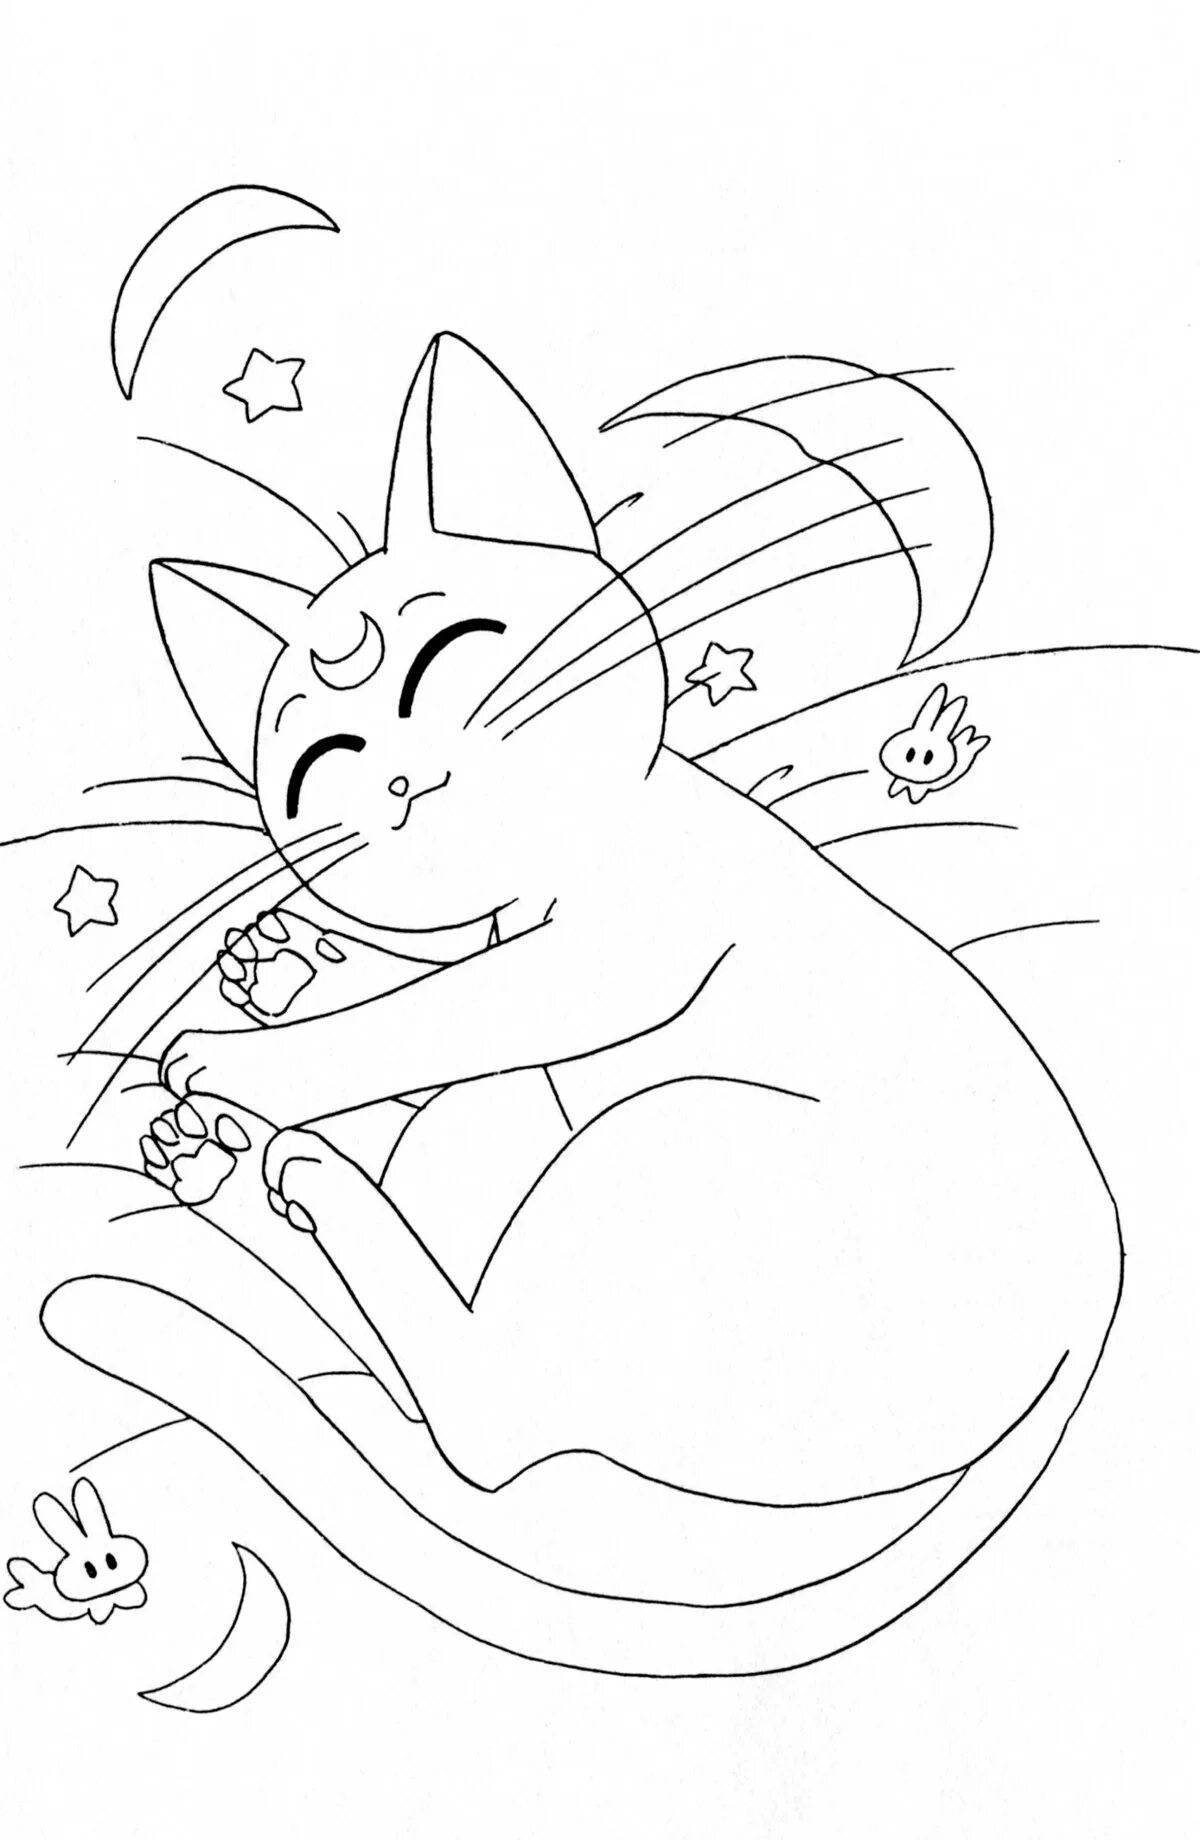 Inquisitive anime kittens coloring page